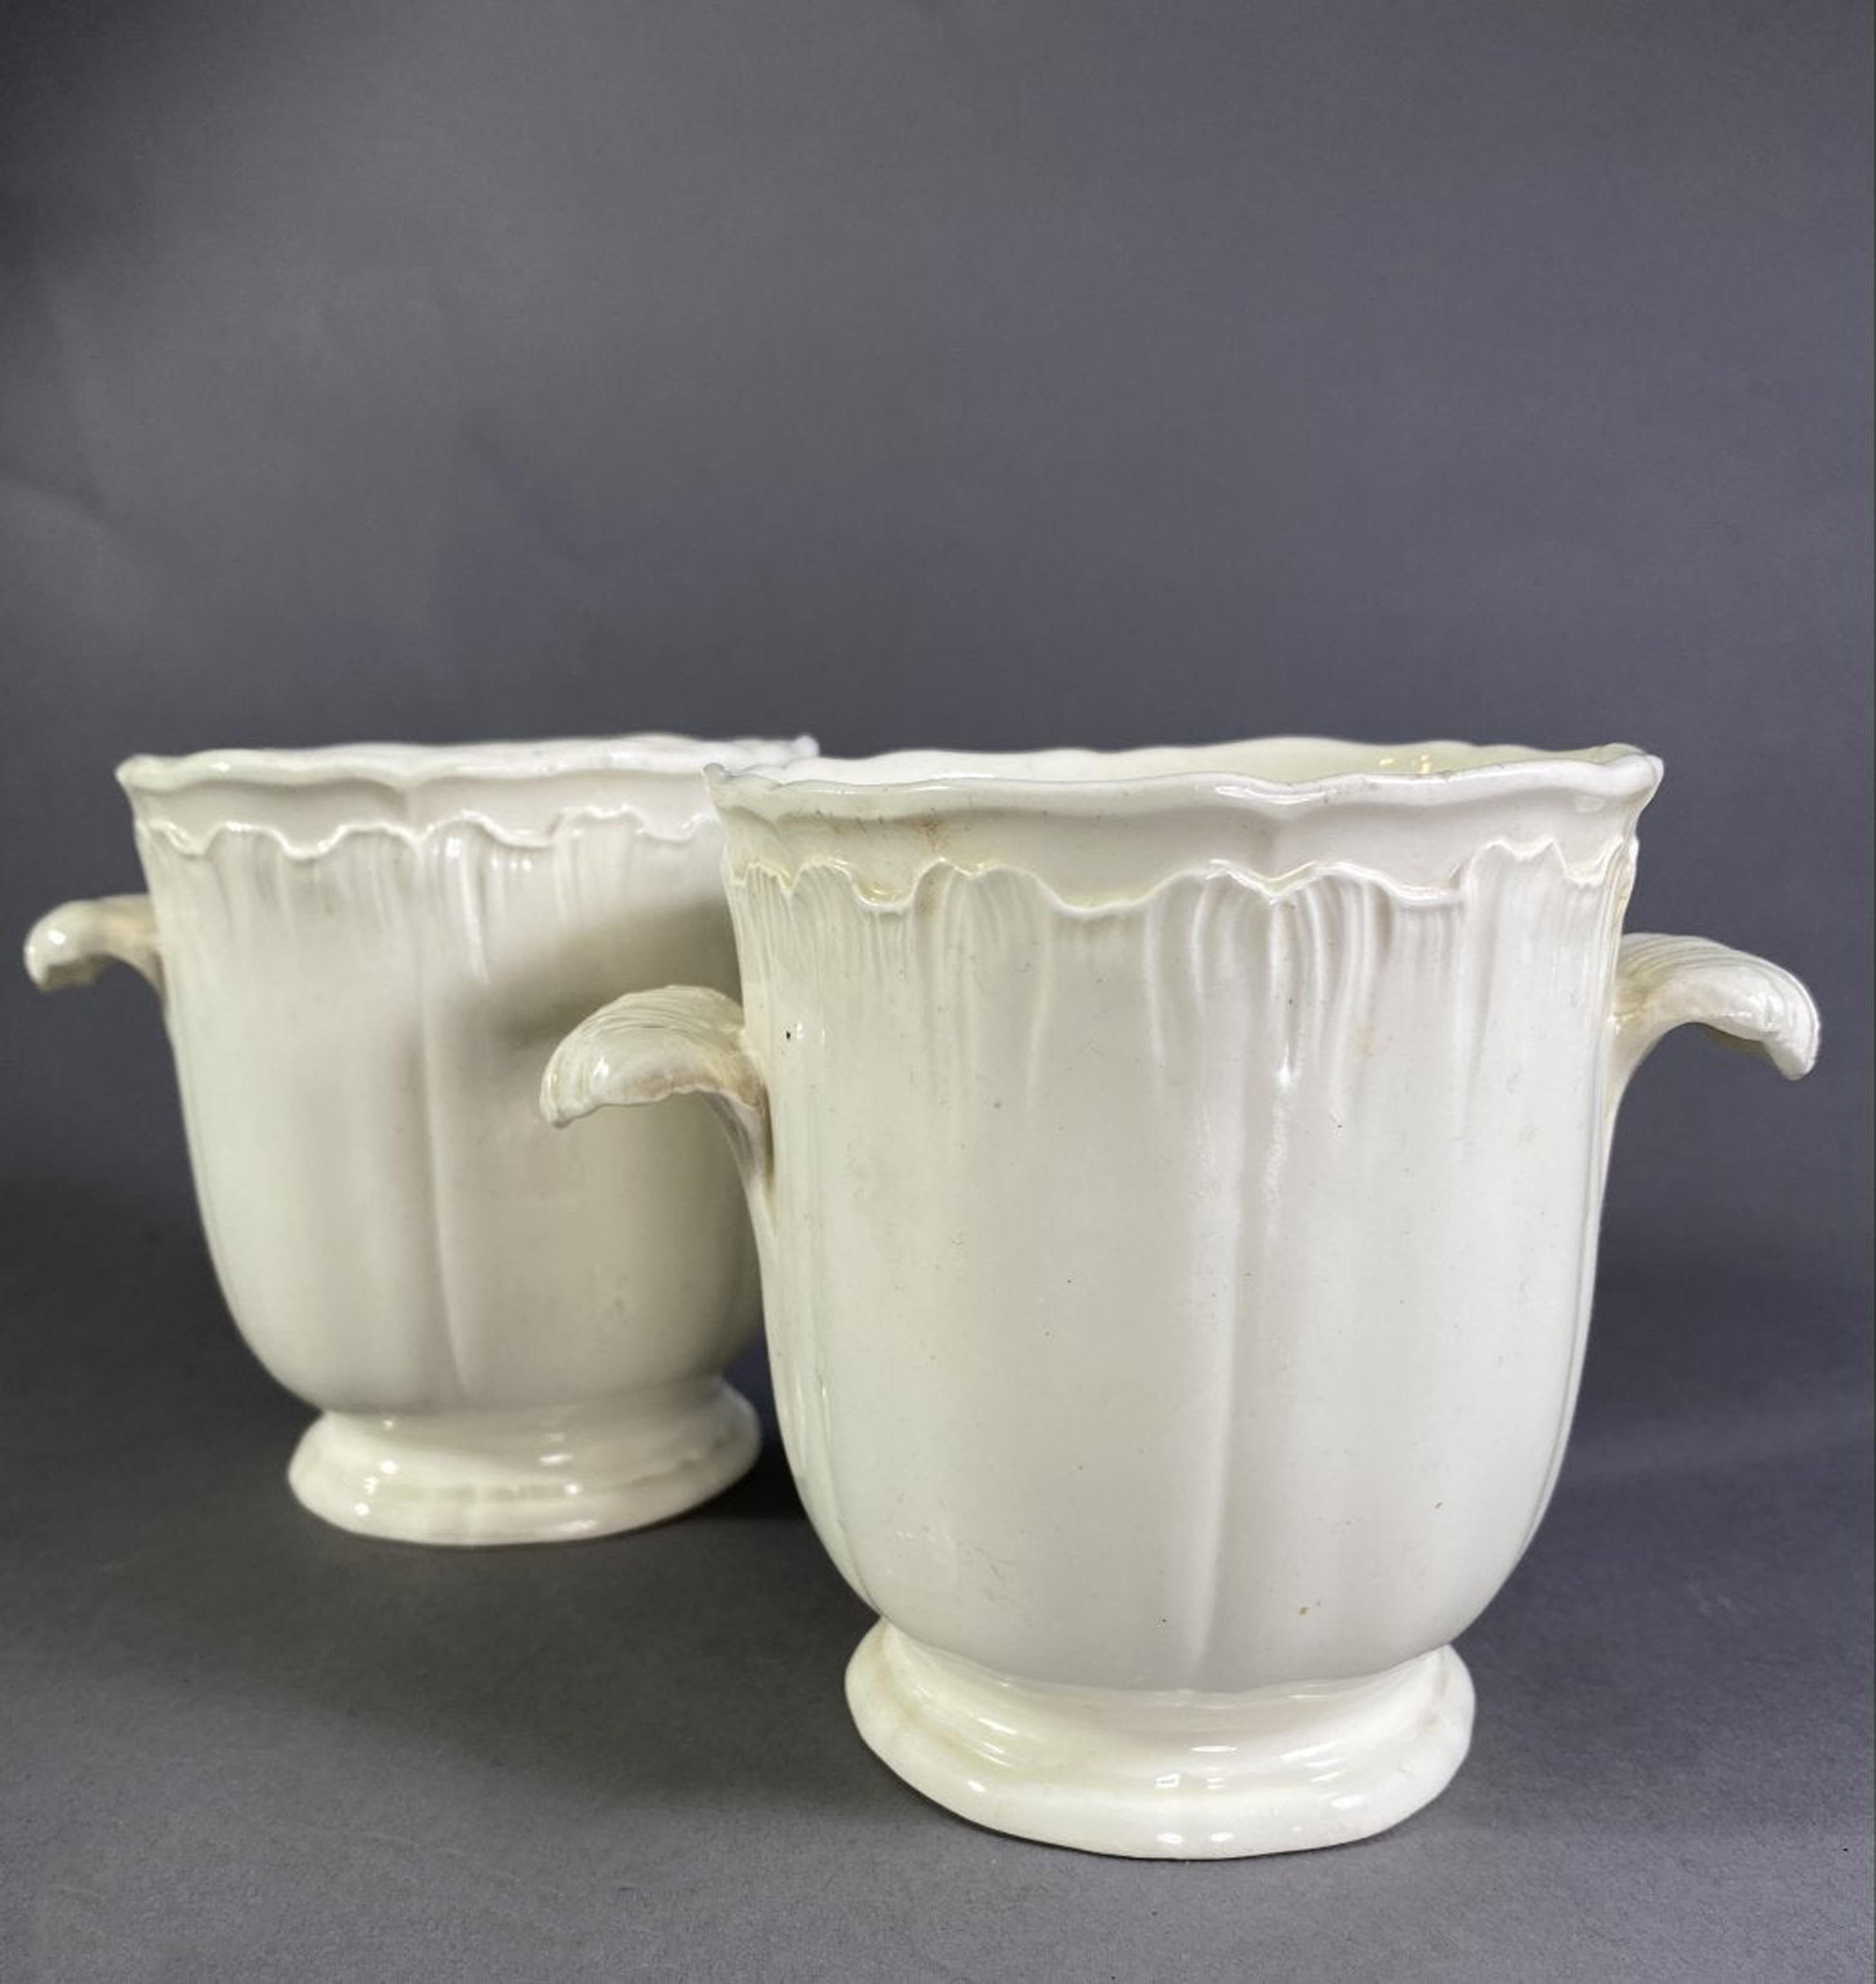 Rare Wedgwood Creamware Wine Glass Rinsers, Late 18th Century In Good Condition For Sale In Downingtown, PA